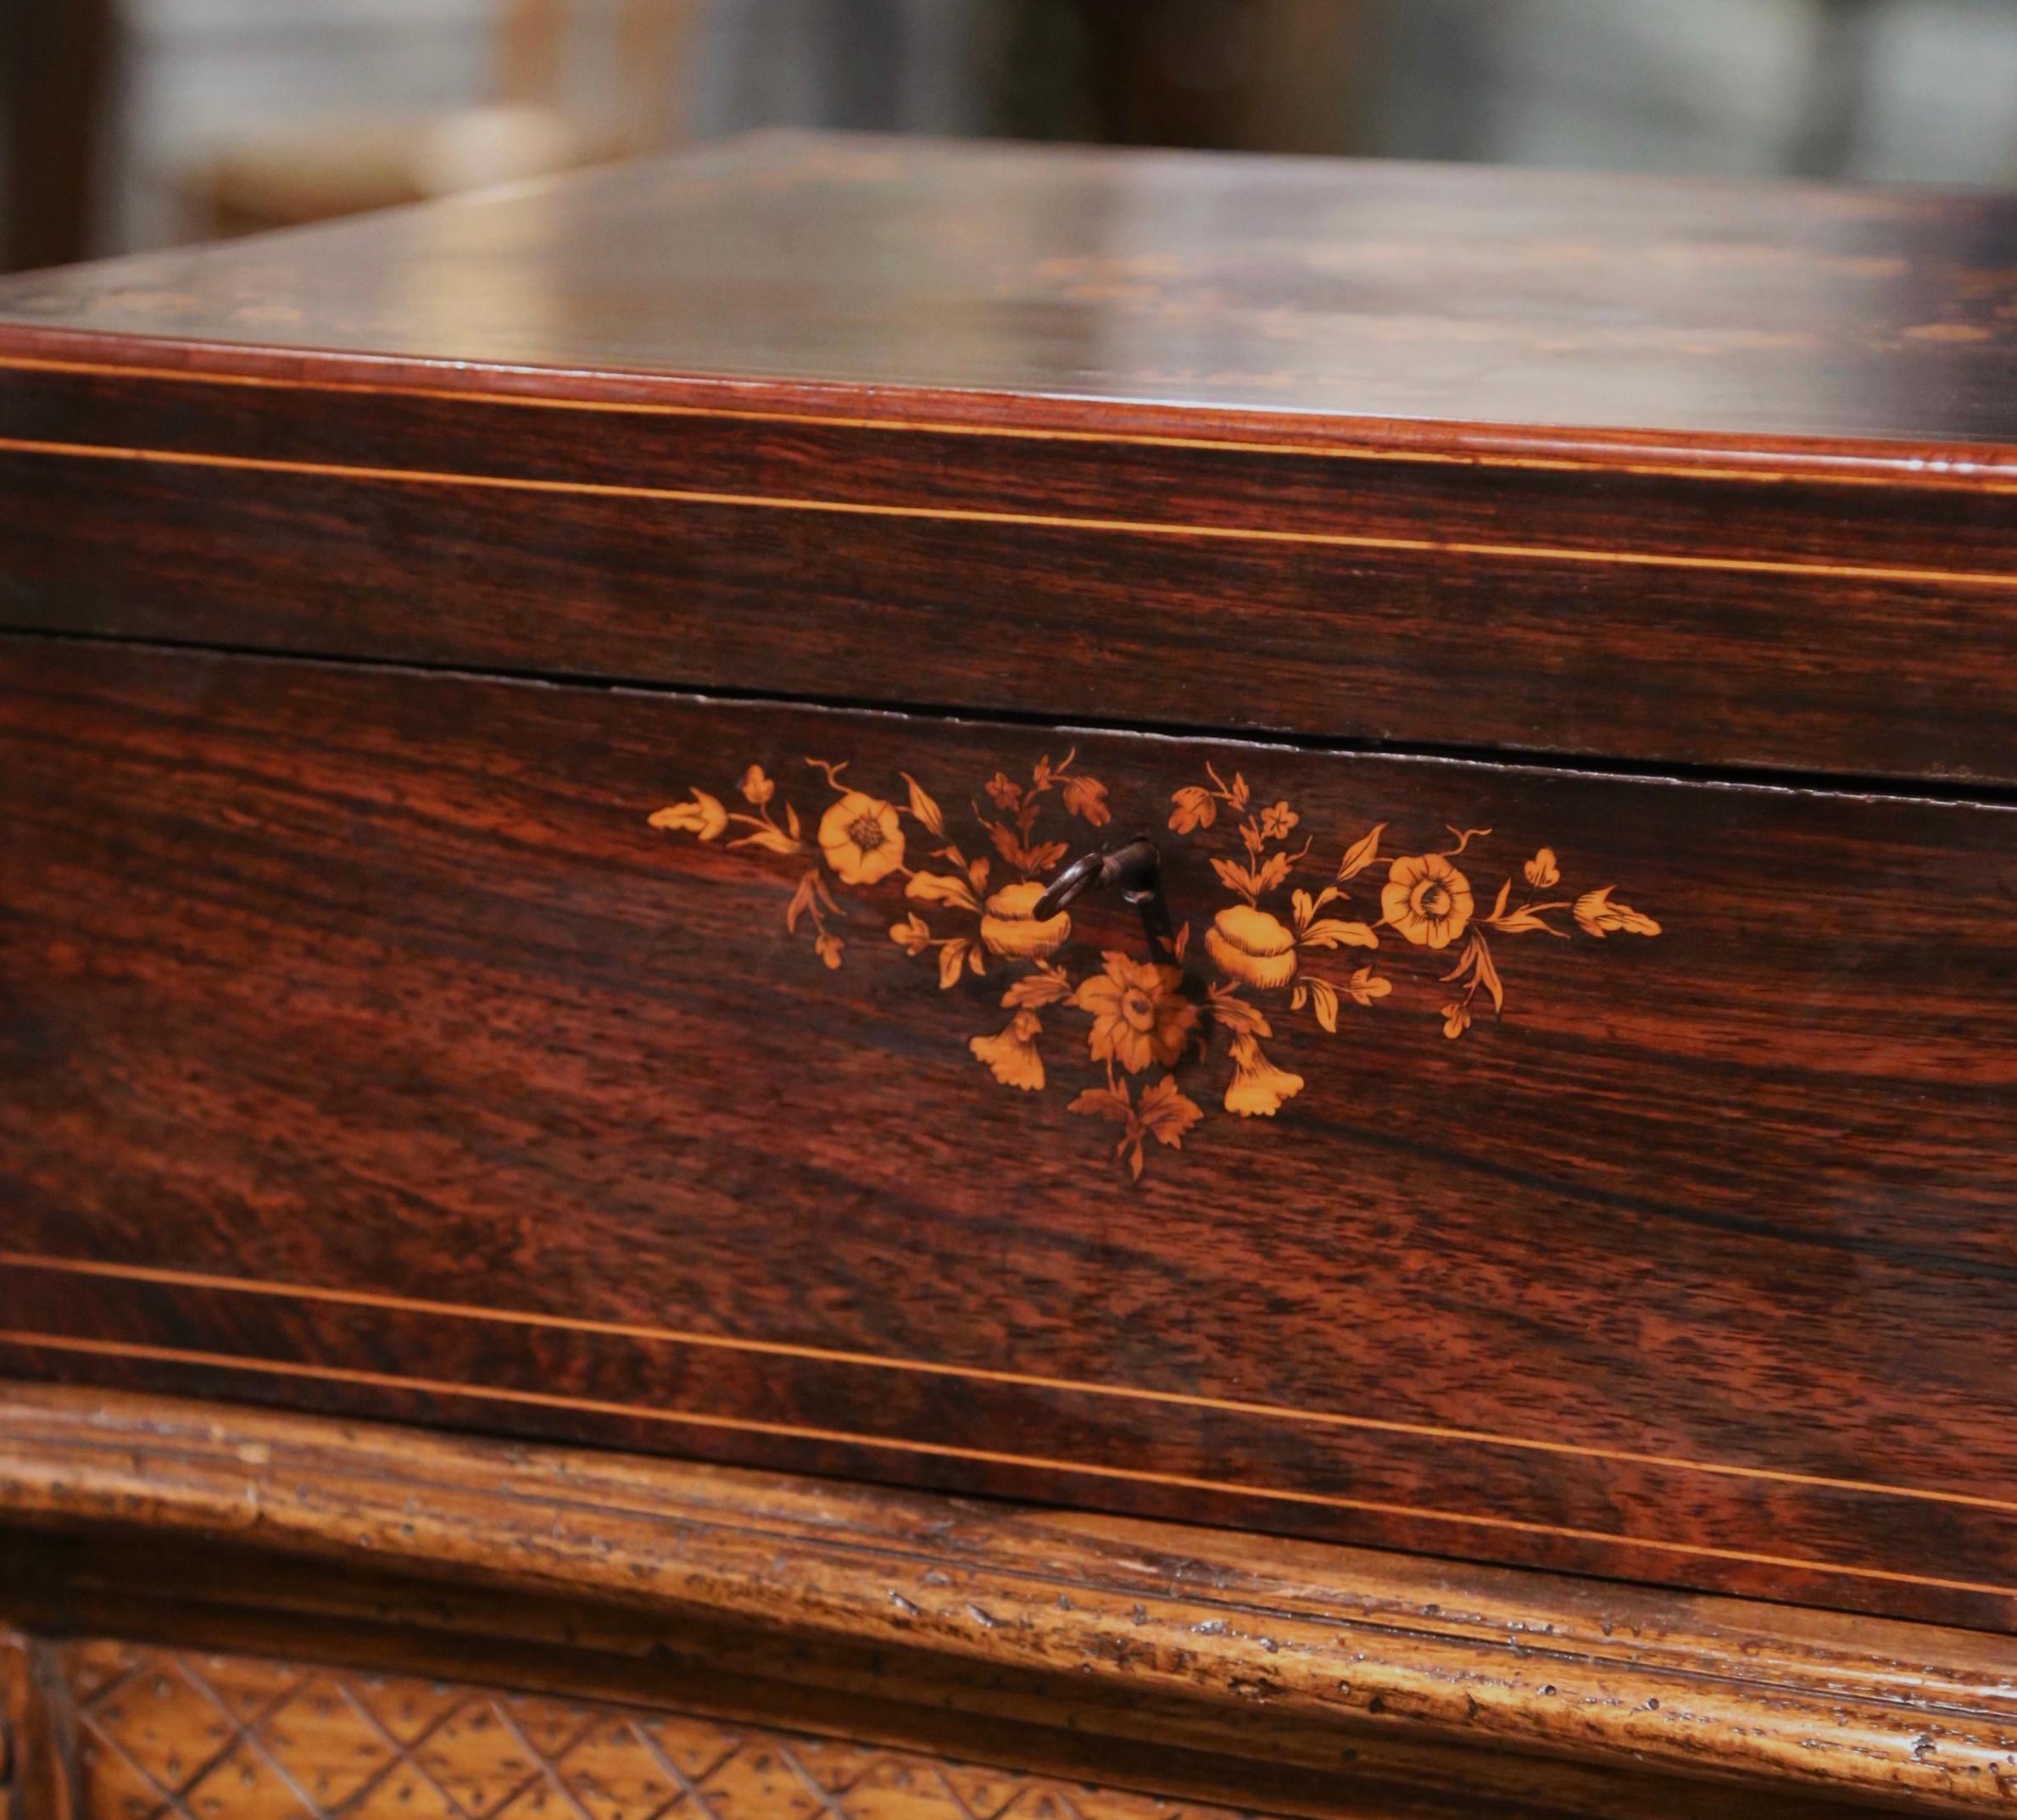 Hand-Crafted 19th Century French Napoleon III Floral Inlaid Rosewood Decorative Jewelry Box For Sale